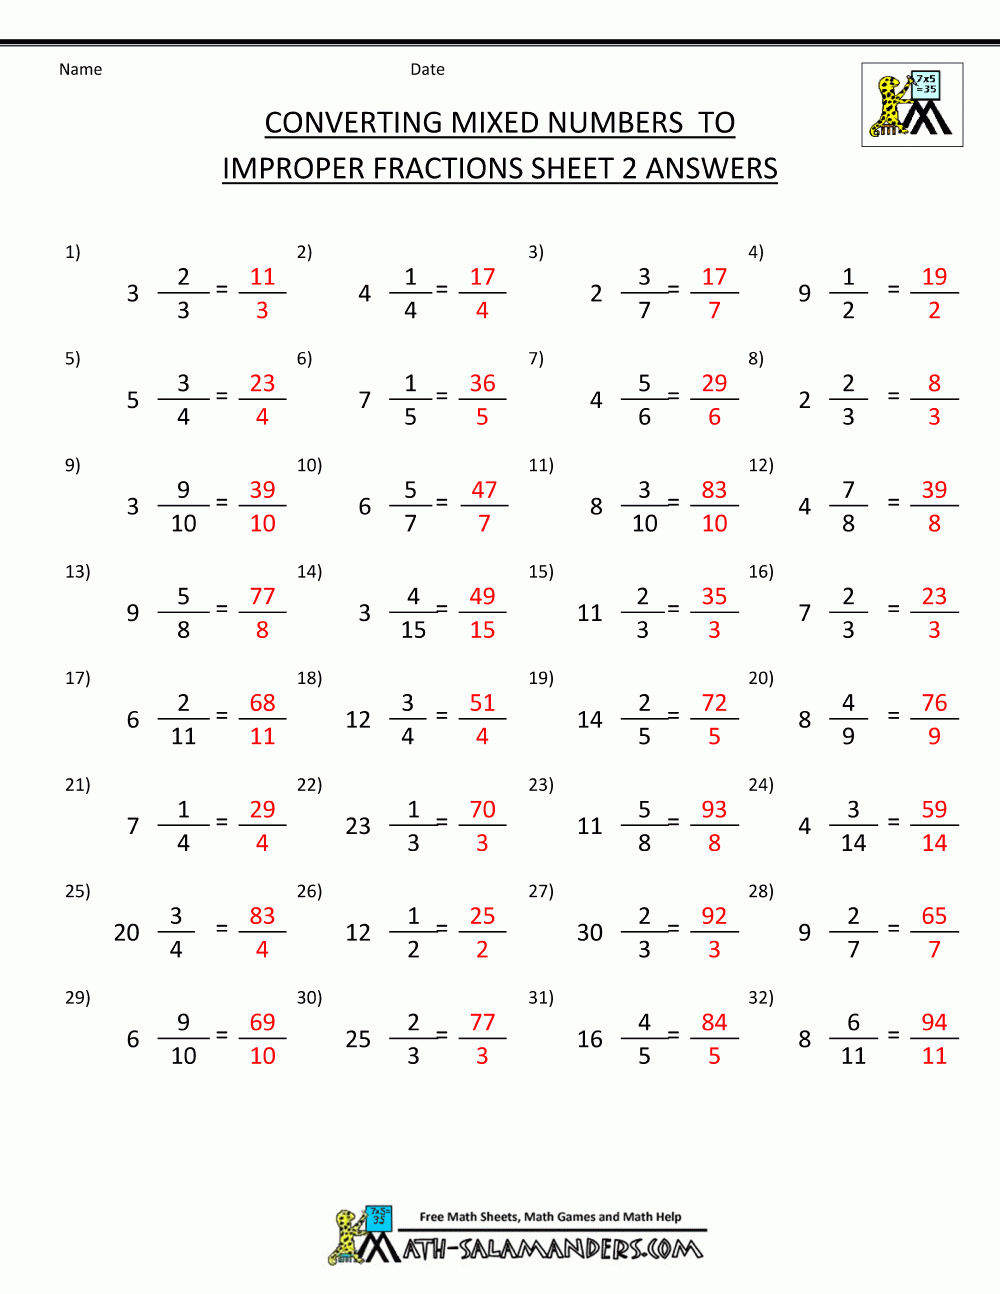 Convert Improper Fraction For Converting Mixed Numbers To Improper Fractions Worksheet